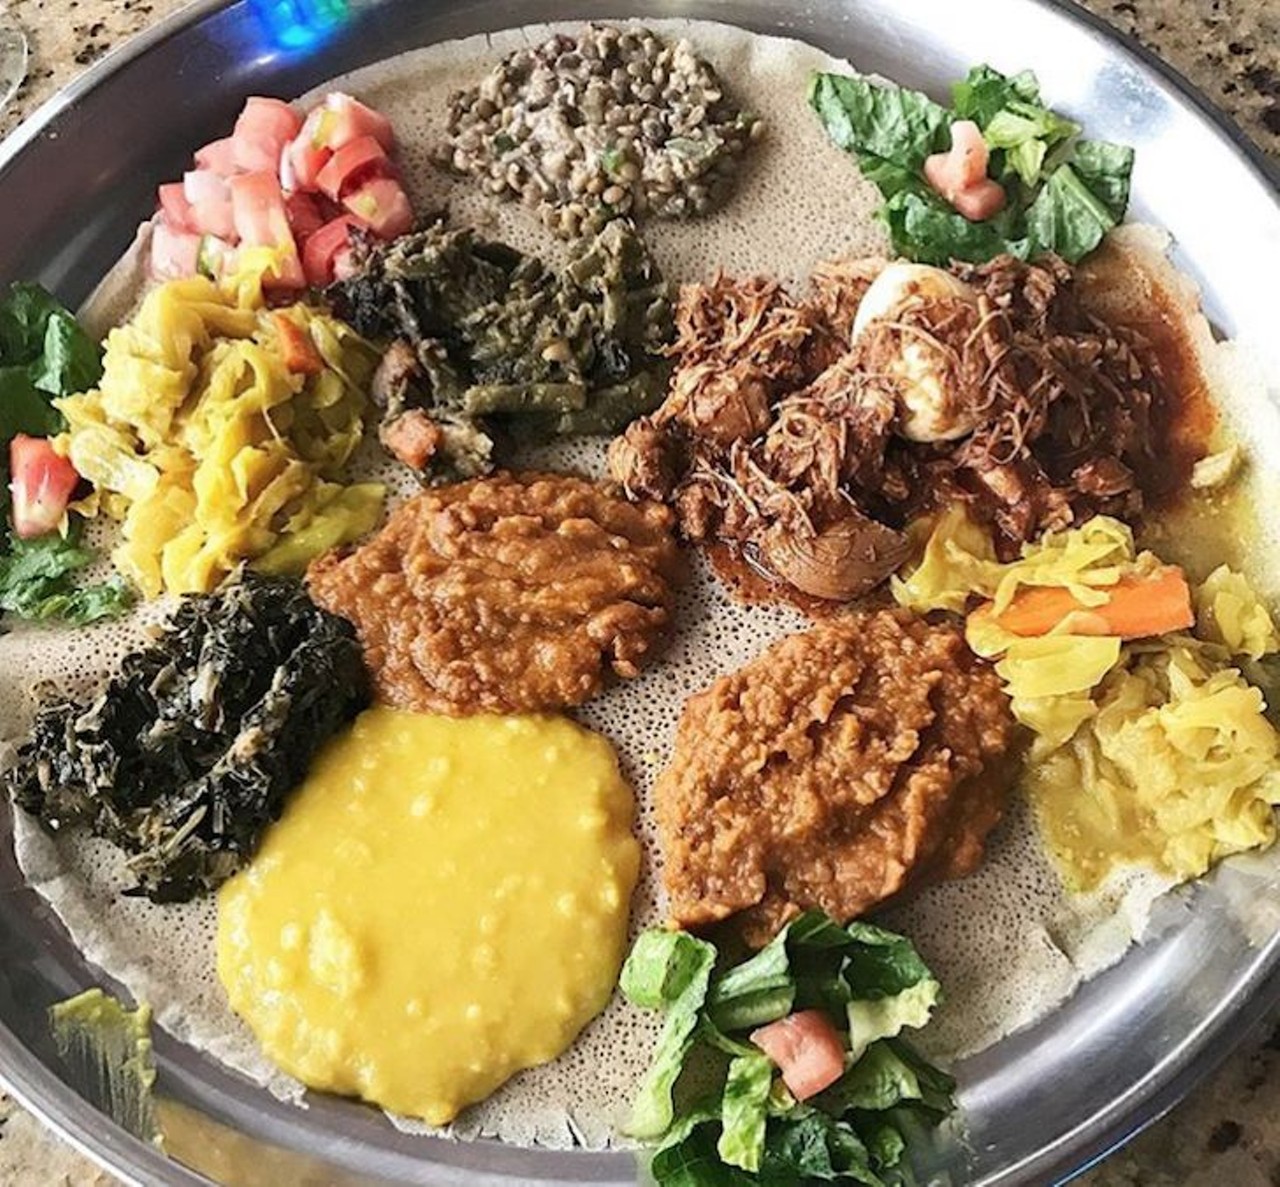 Nile Ethiopian
7048 International Dr., 407-354-0026 
A rarity, this African restaurant is bringing some serious Ethiopian cuisine to Central Florida. Silverware is not necessary here, where you are encouraged to scoop up the lentils with Injera bread. 
Photo via nomnomwithashleyrose/Instagram